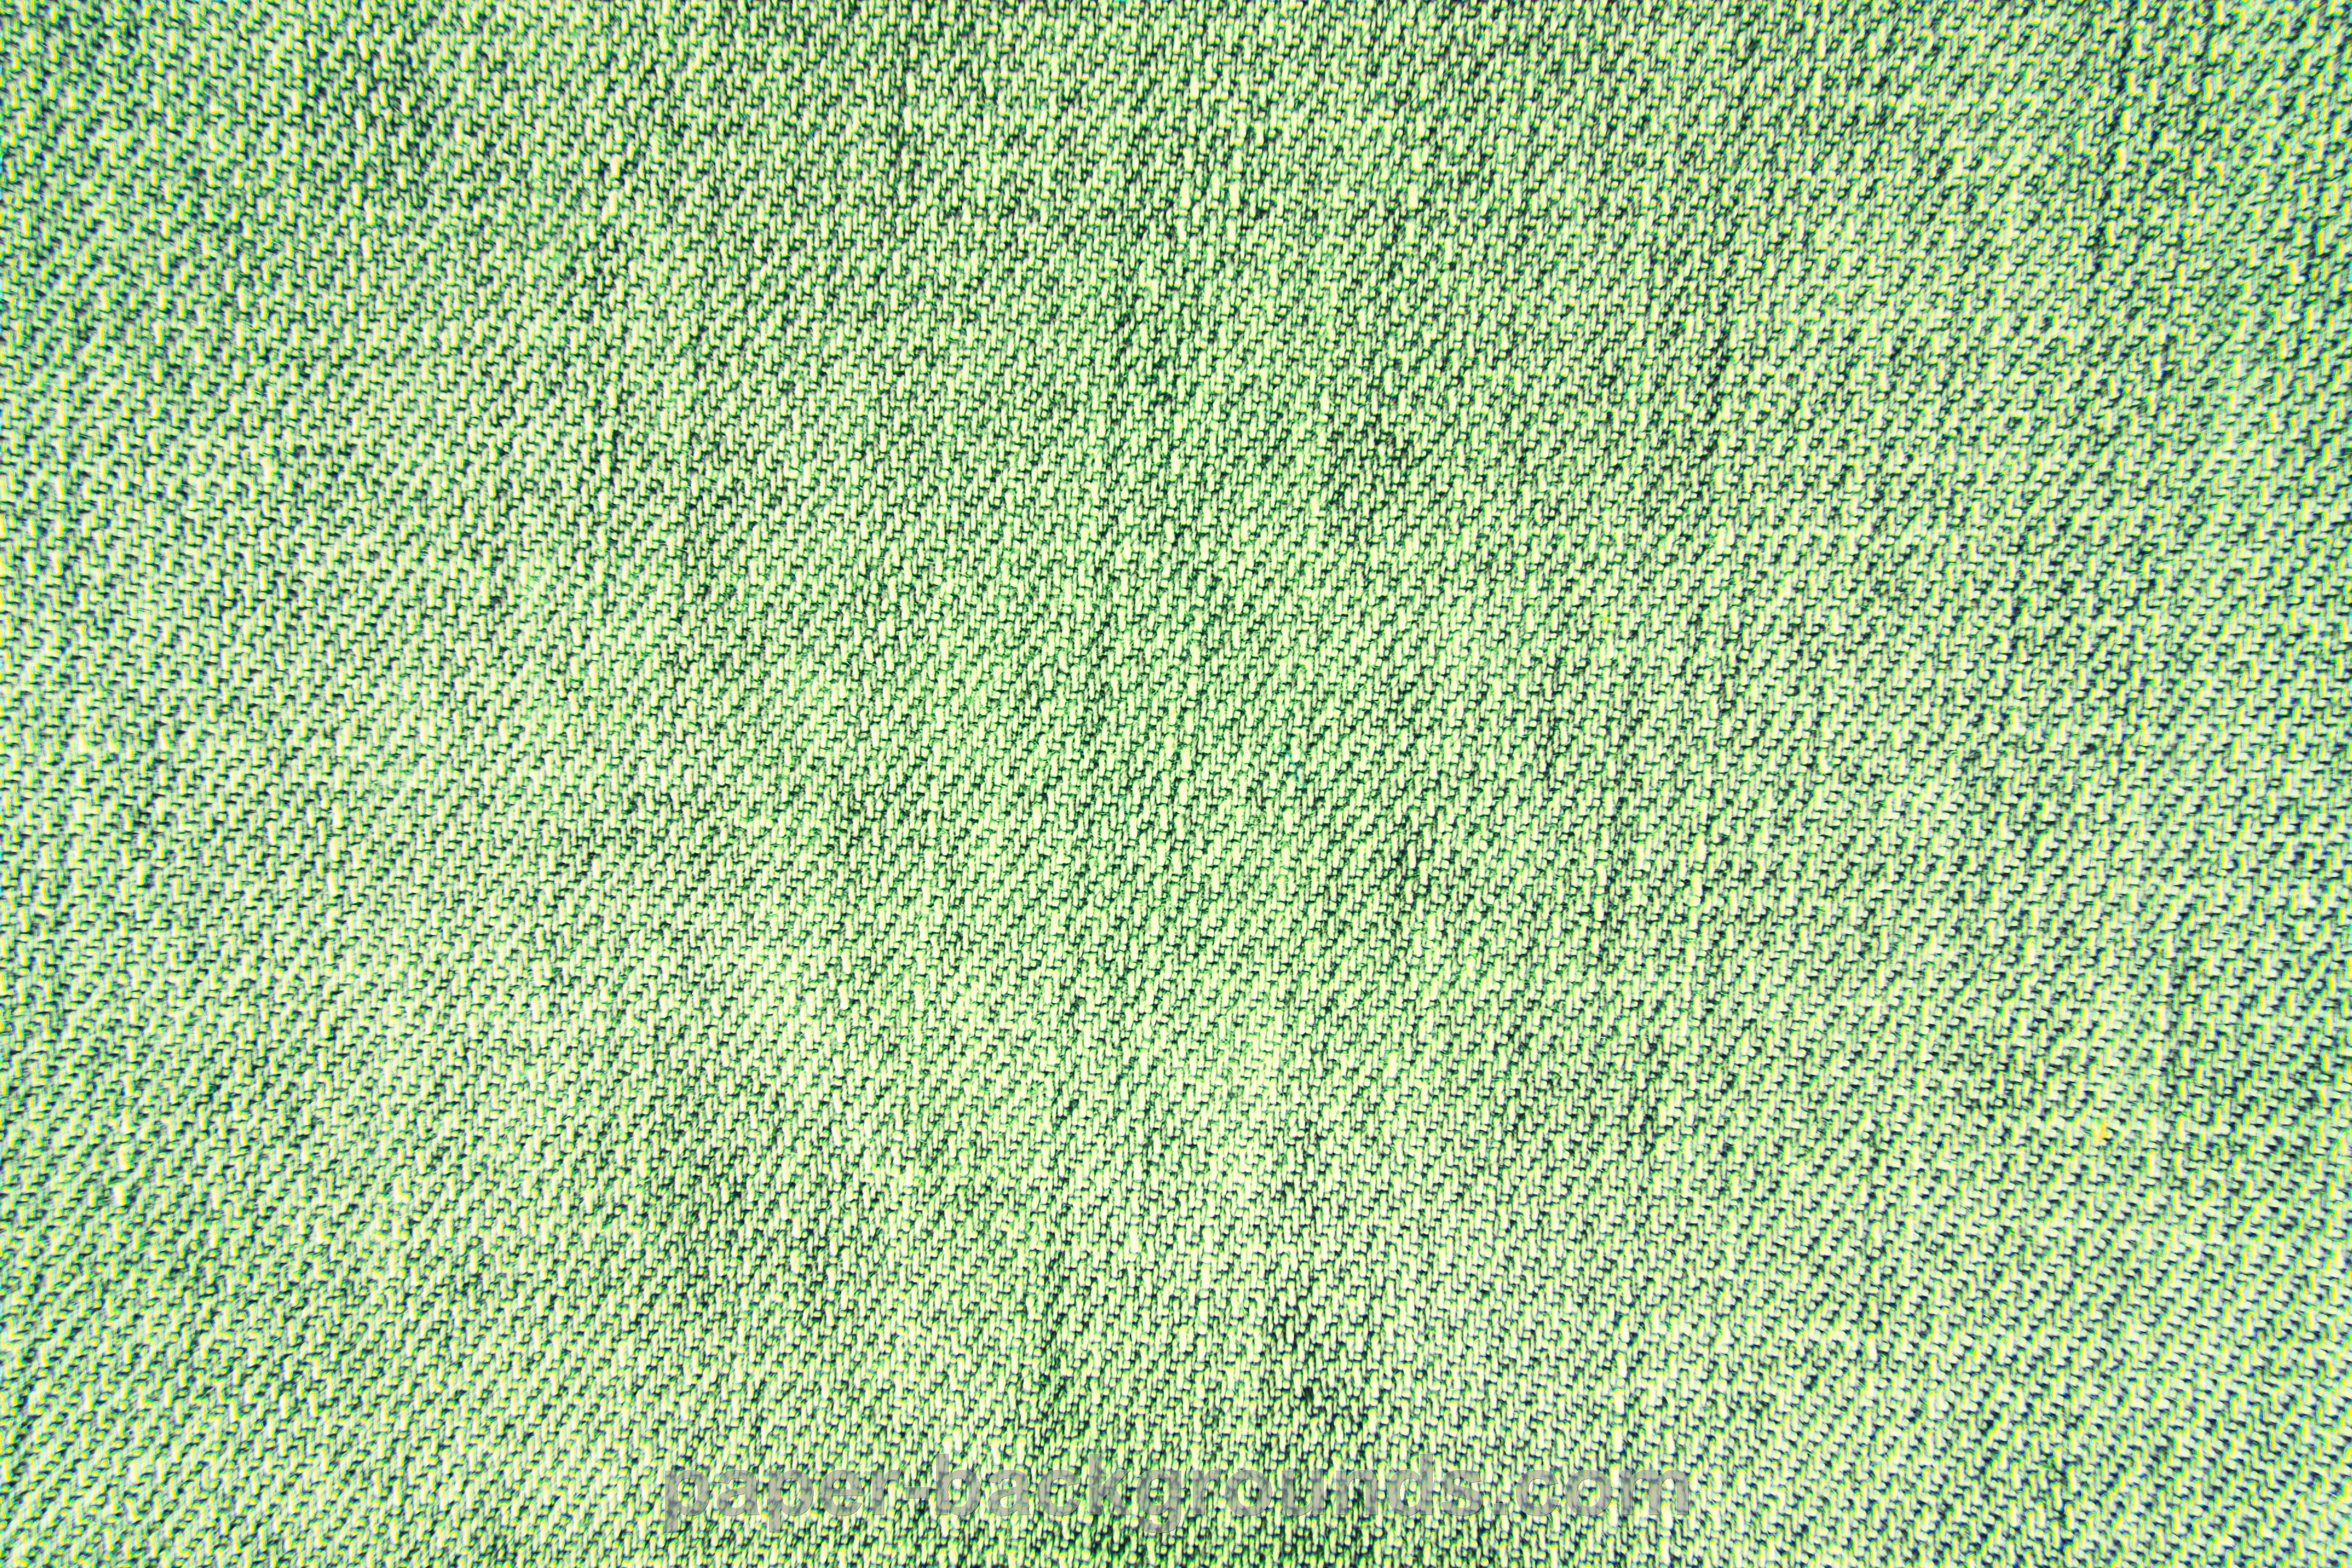 Green Vintage Fabric Texture Background High Resolution